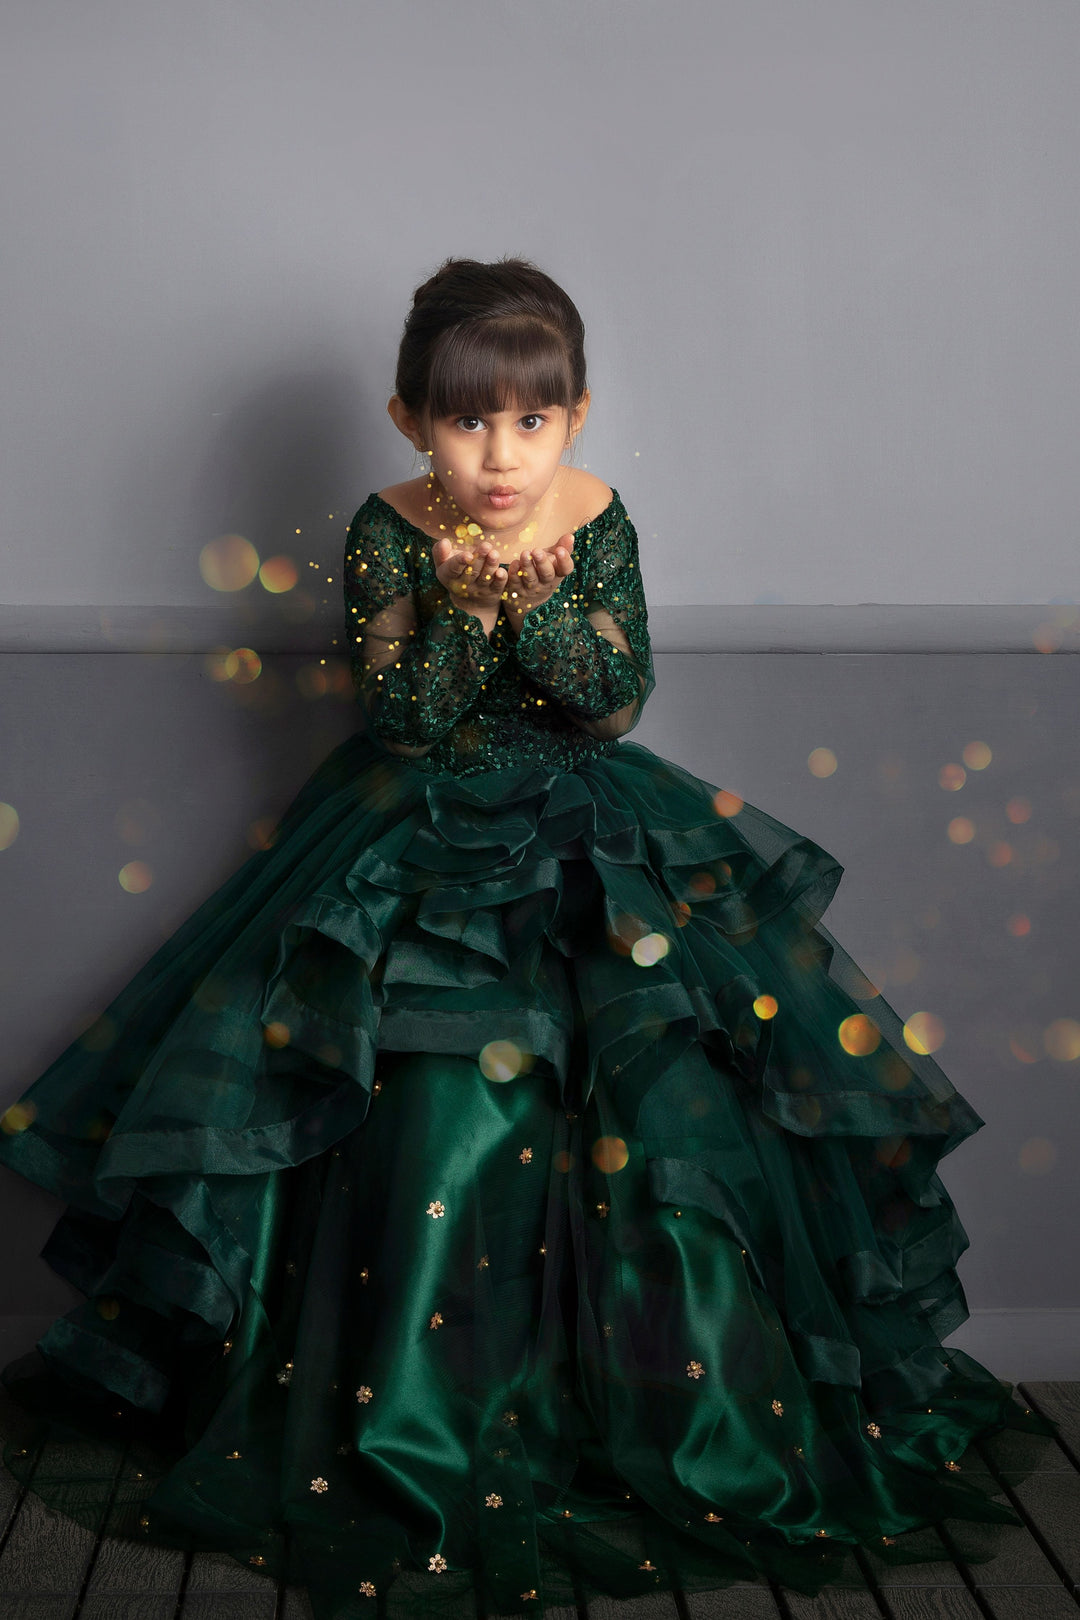 The Emerald Superflous Gown